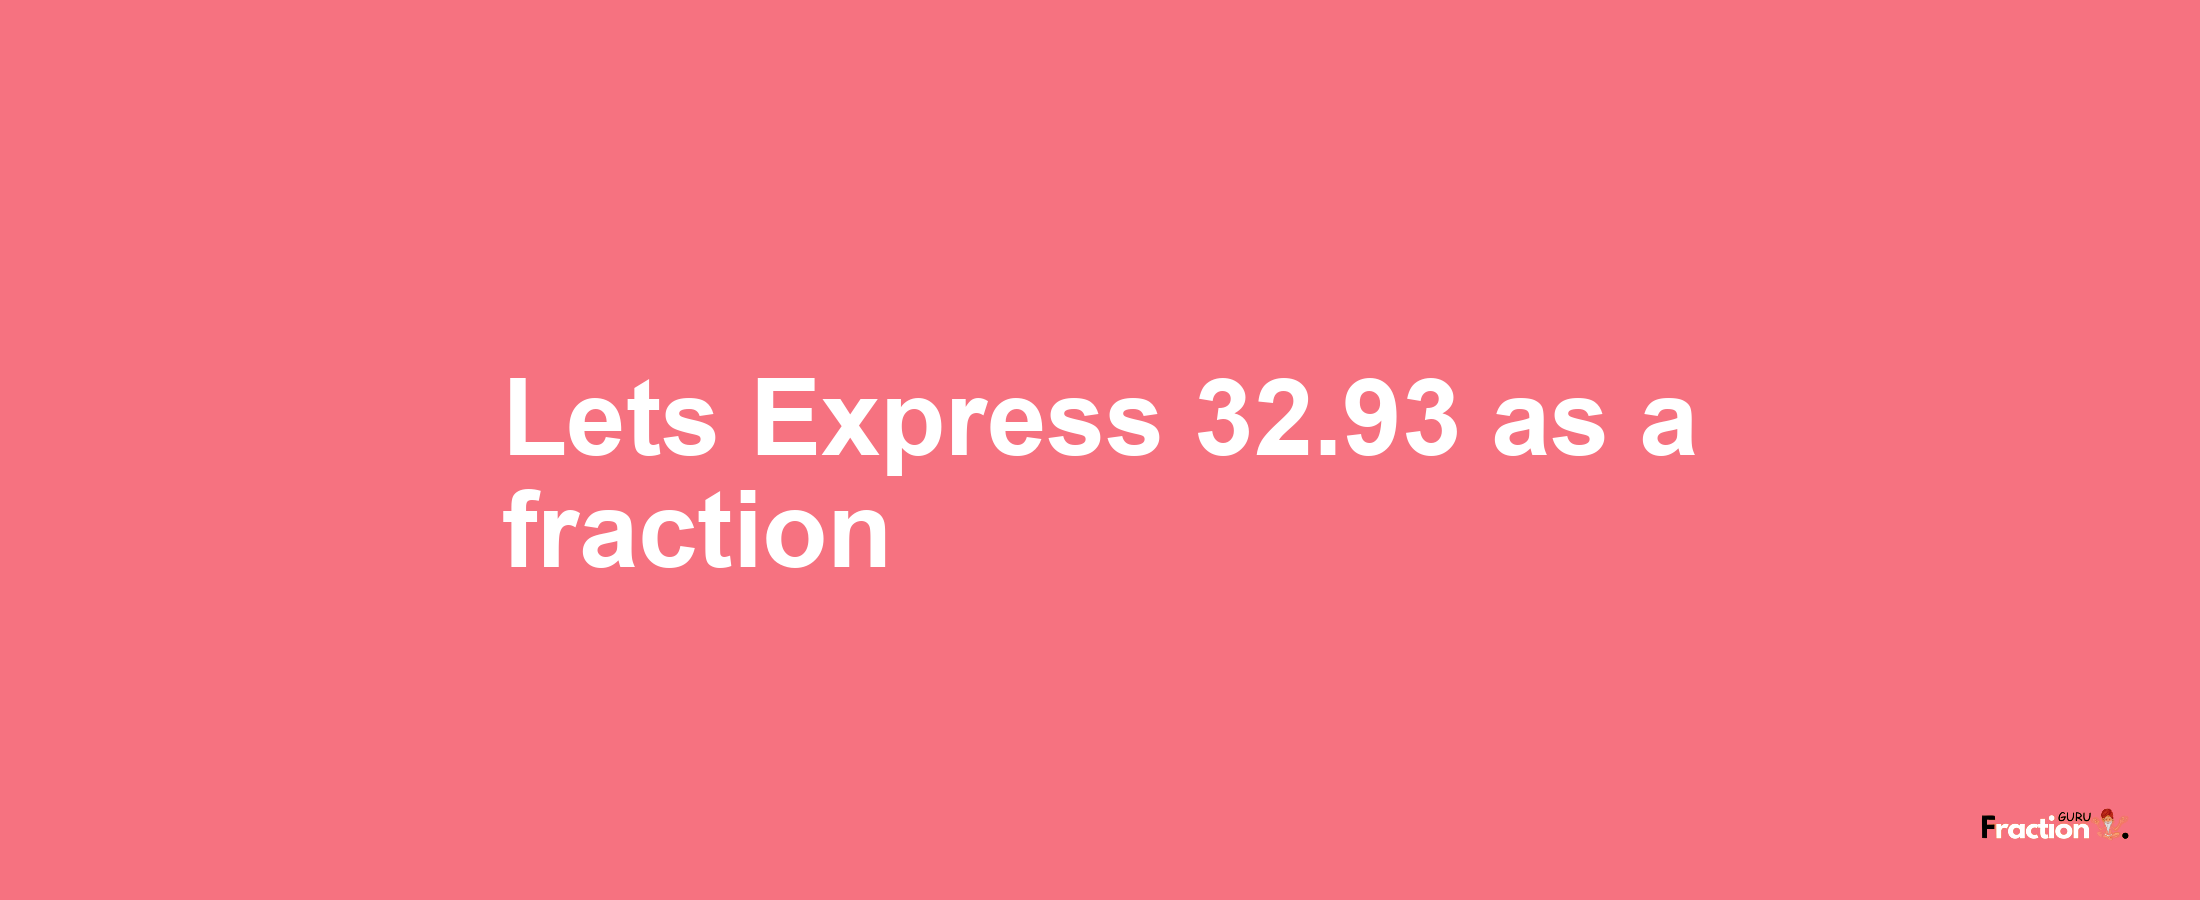 Lets Express 32.93 as afraction